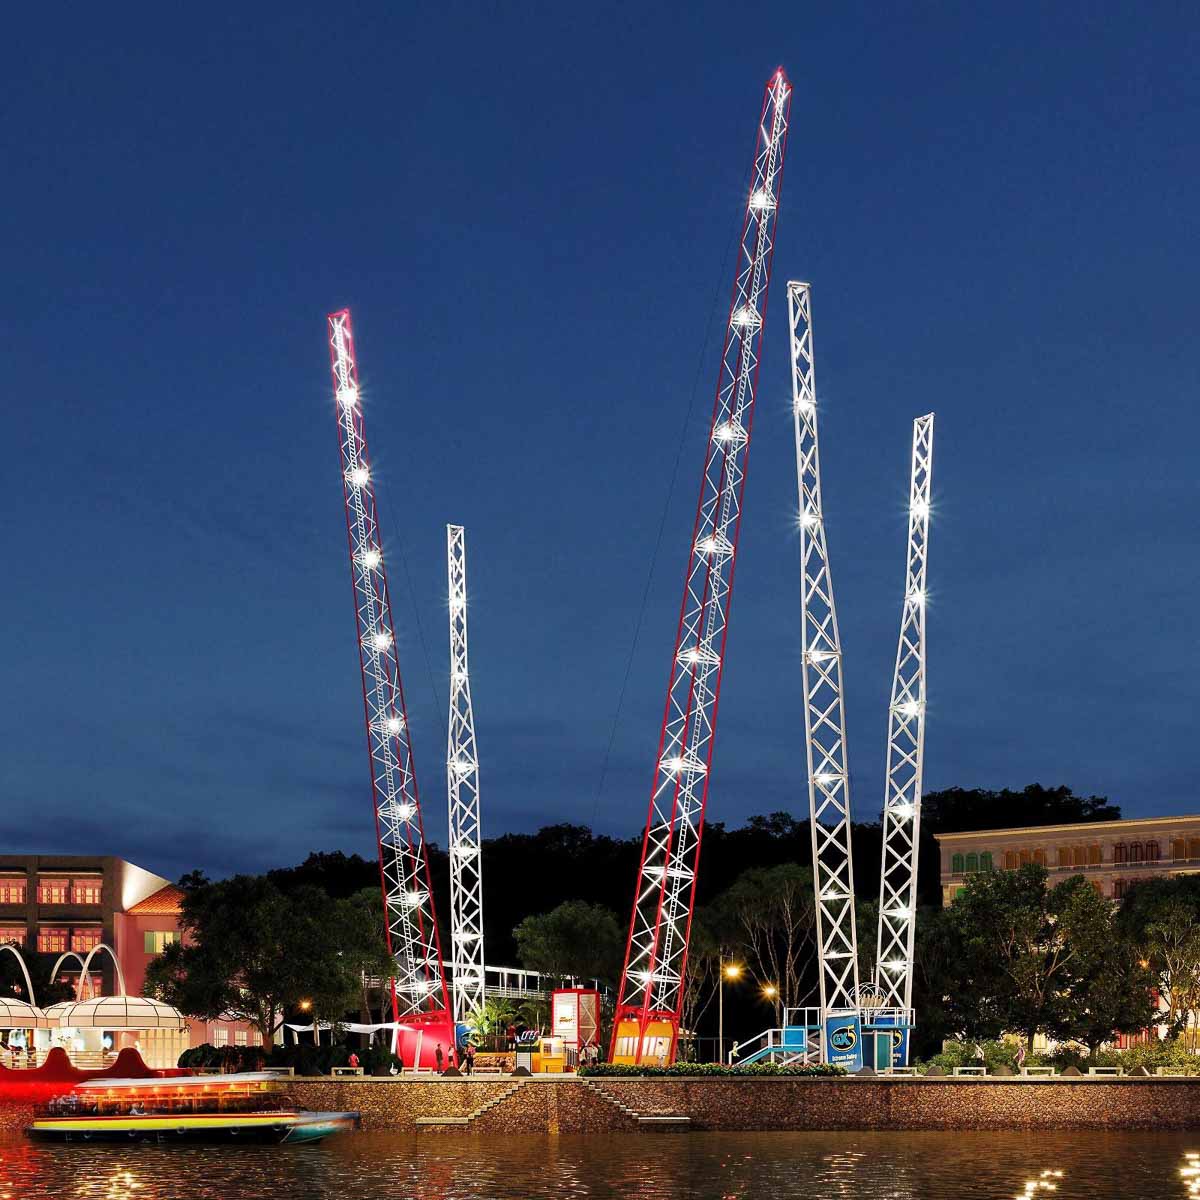 Slingshot Catapult Ride Clarke Quay - New Attractions in Singapore 2021